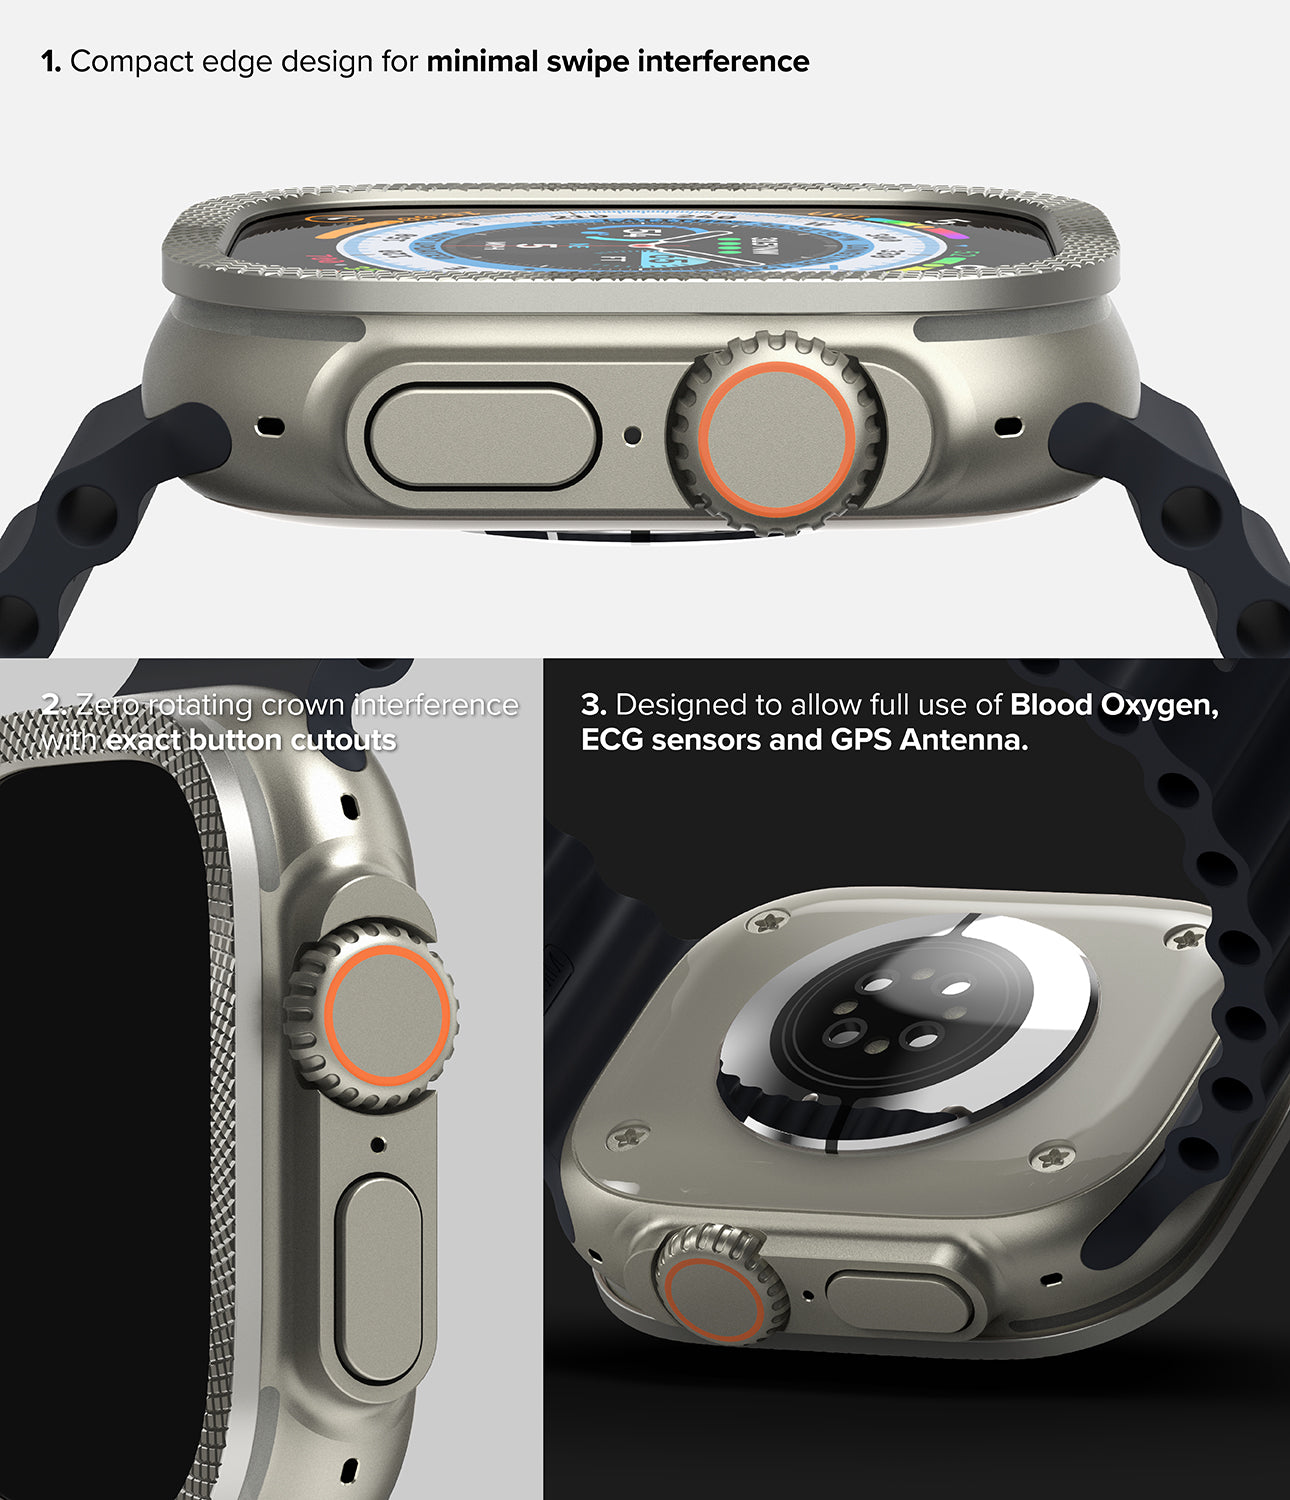 Apple Watch Ultra 2 / 1 | Glass + Bezel Styling 49-48 - Compact edge design for minimal swipe interference. Zero rotating crown interference with exact button cutouts. Designed to allow full use of Blood Oxygen, ECG sensors and GPS Antenna.